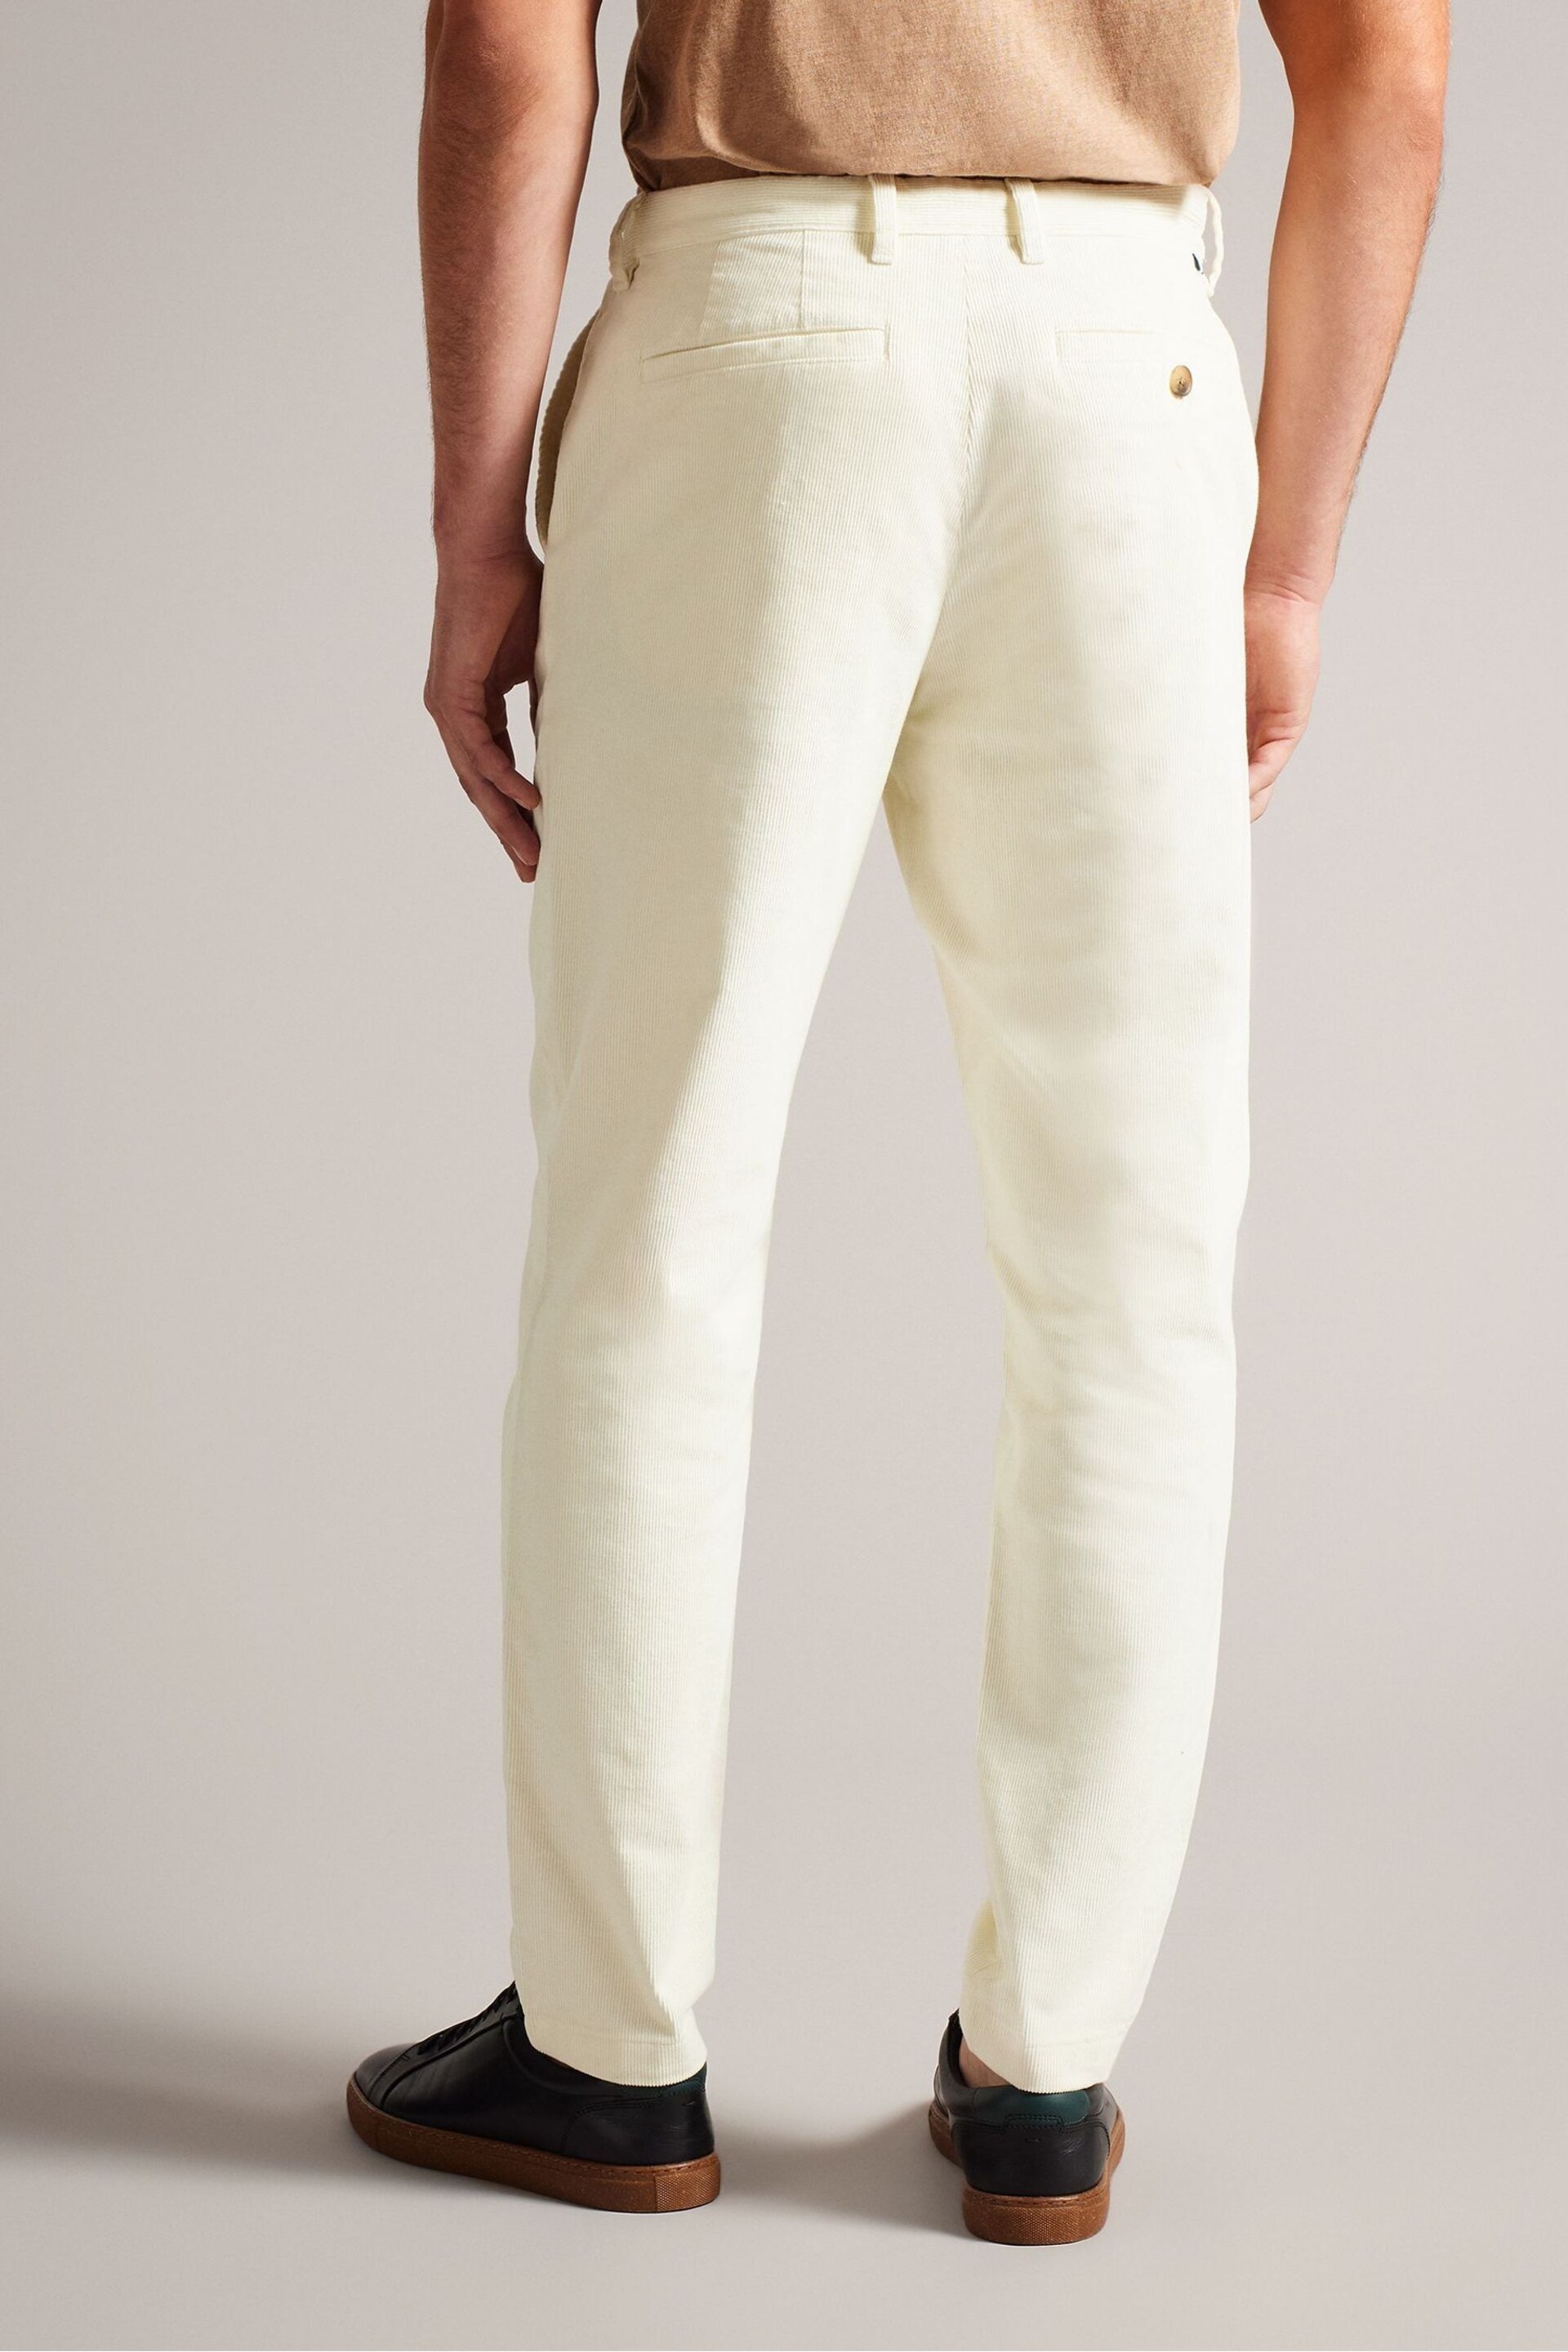 Ted Baker Cream Regular Fit Payet Cord Trousers - Image 2 of 5